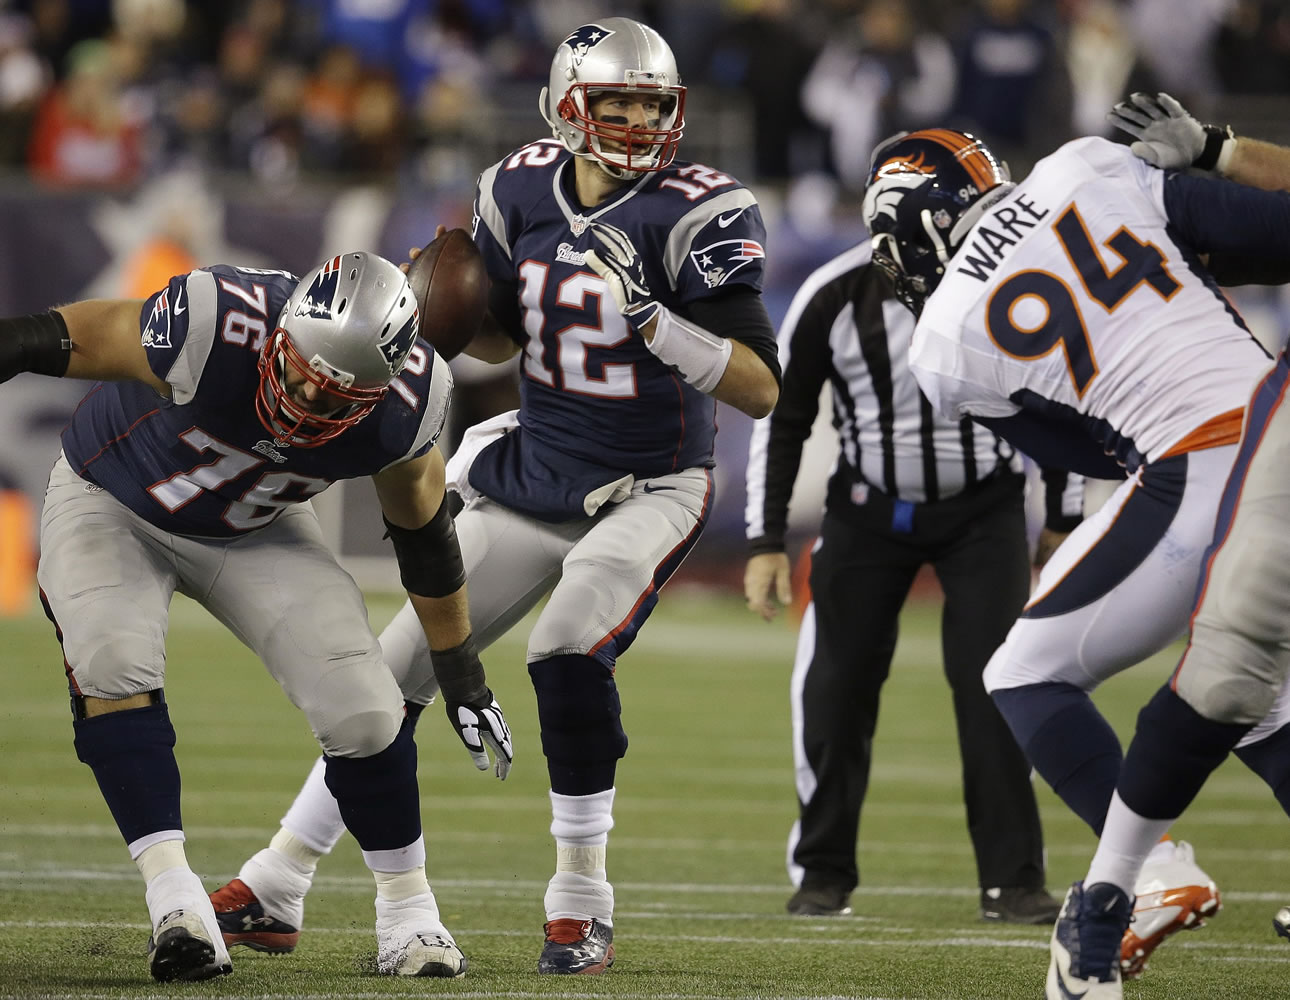 New England Patriots quarterback Tom Brady (12) drops back to pass in the first half against the Denver Broncos on Sunday, Nov. 2, 2014, in Foxborough, Mass.